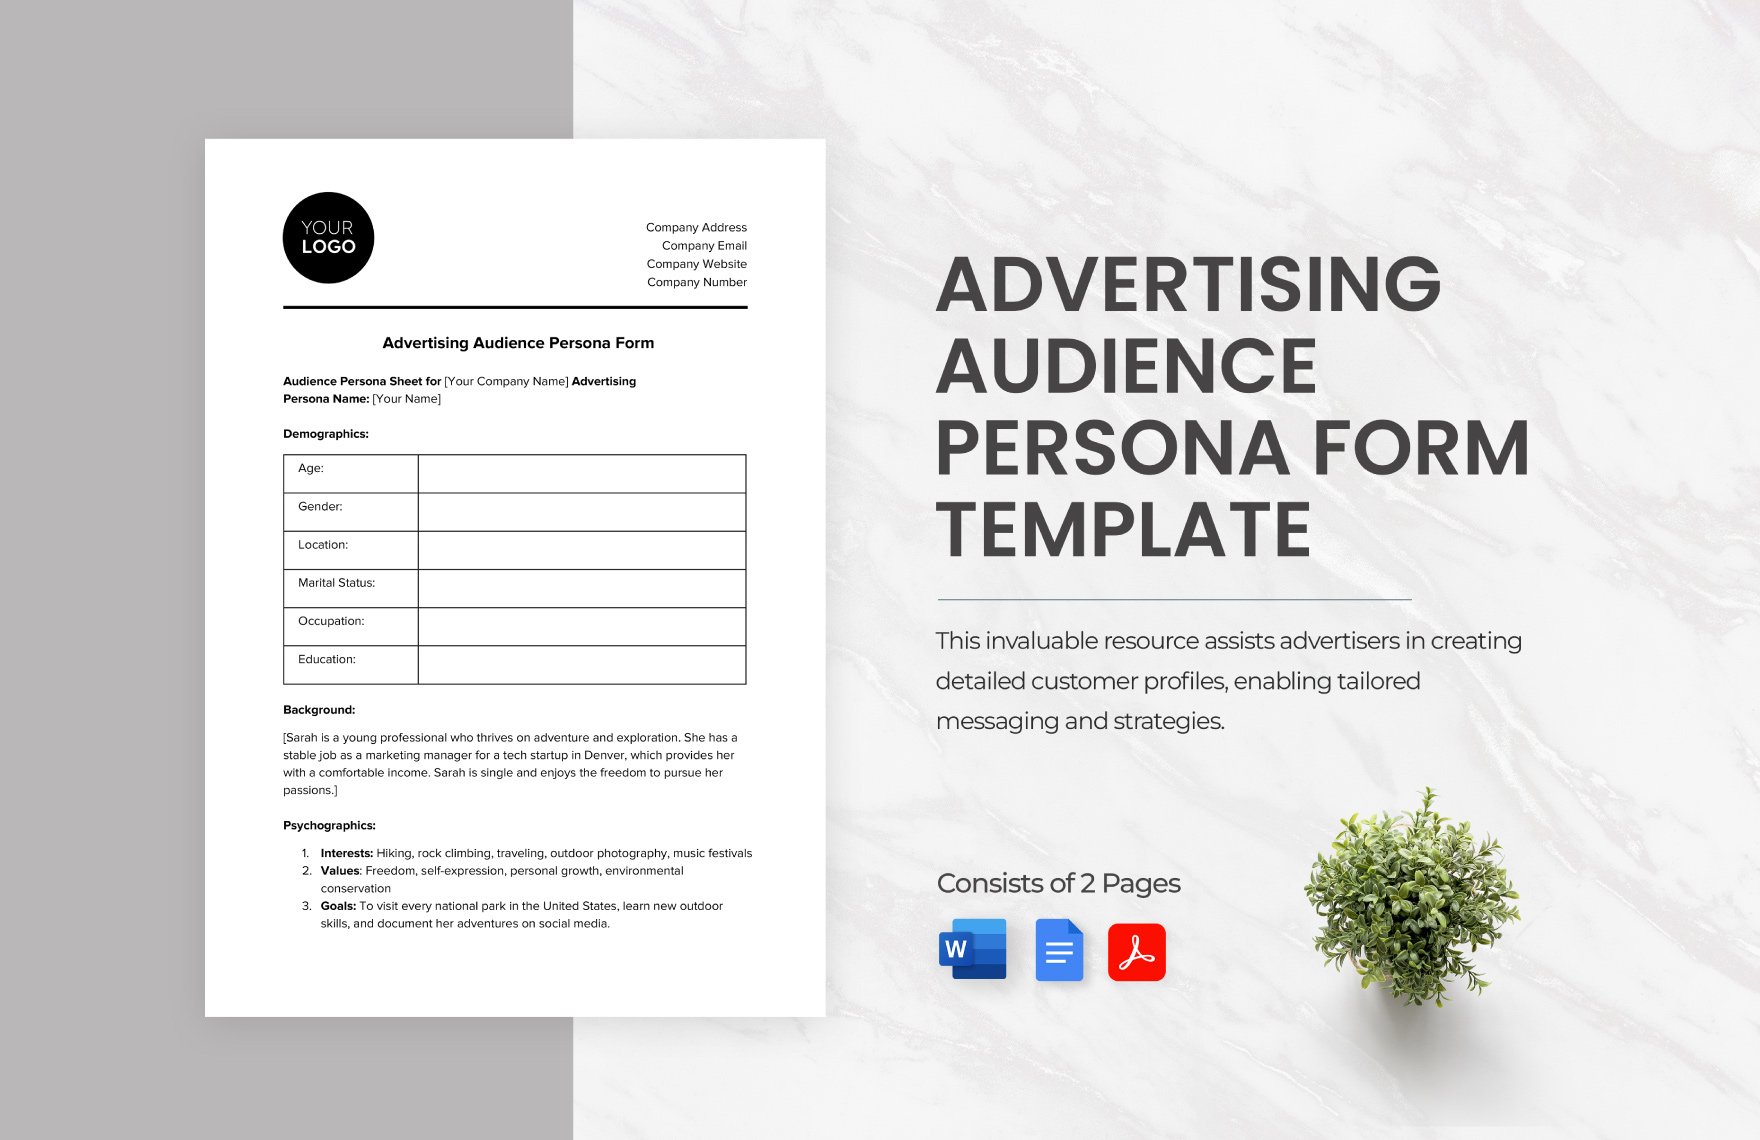 Advertising Audience Persona Form Template